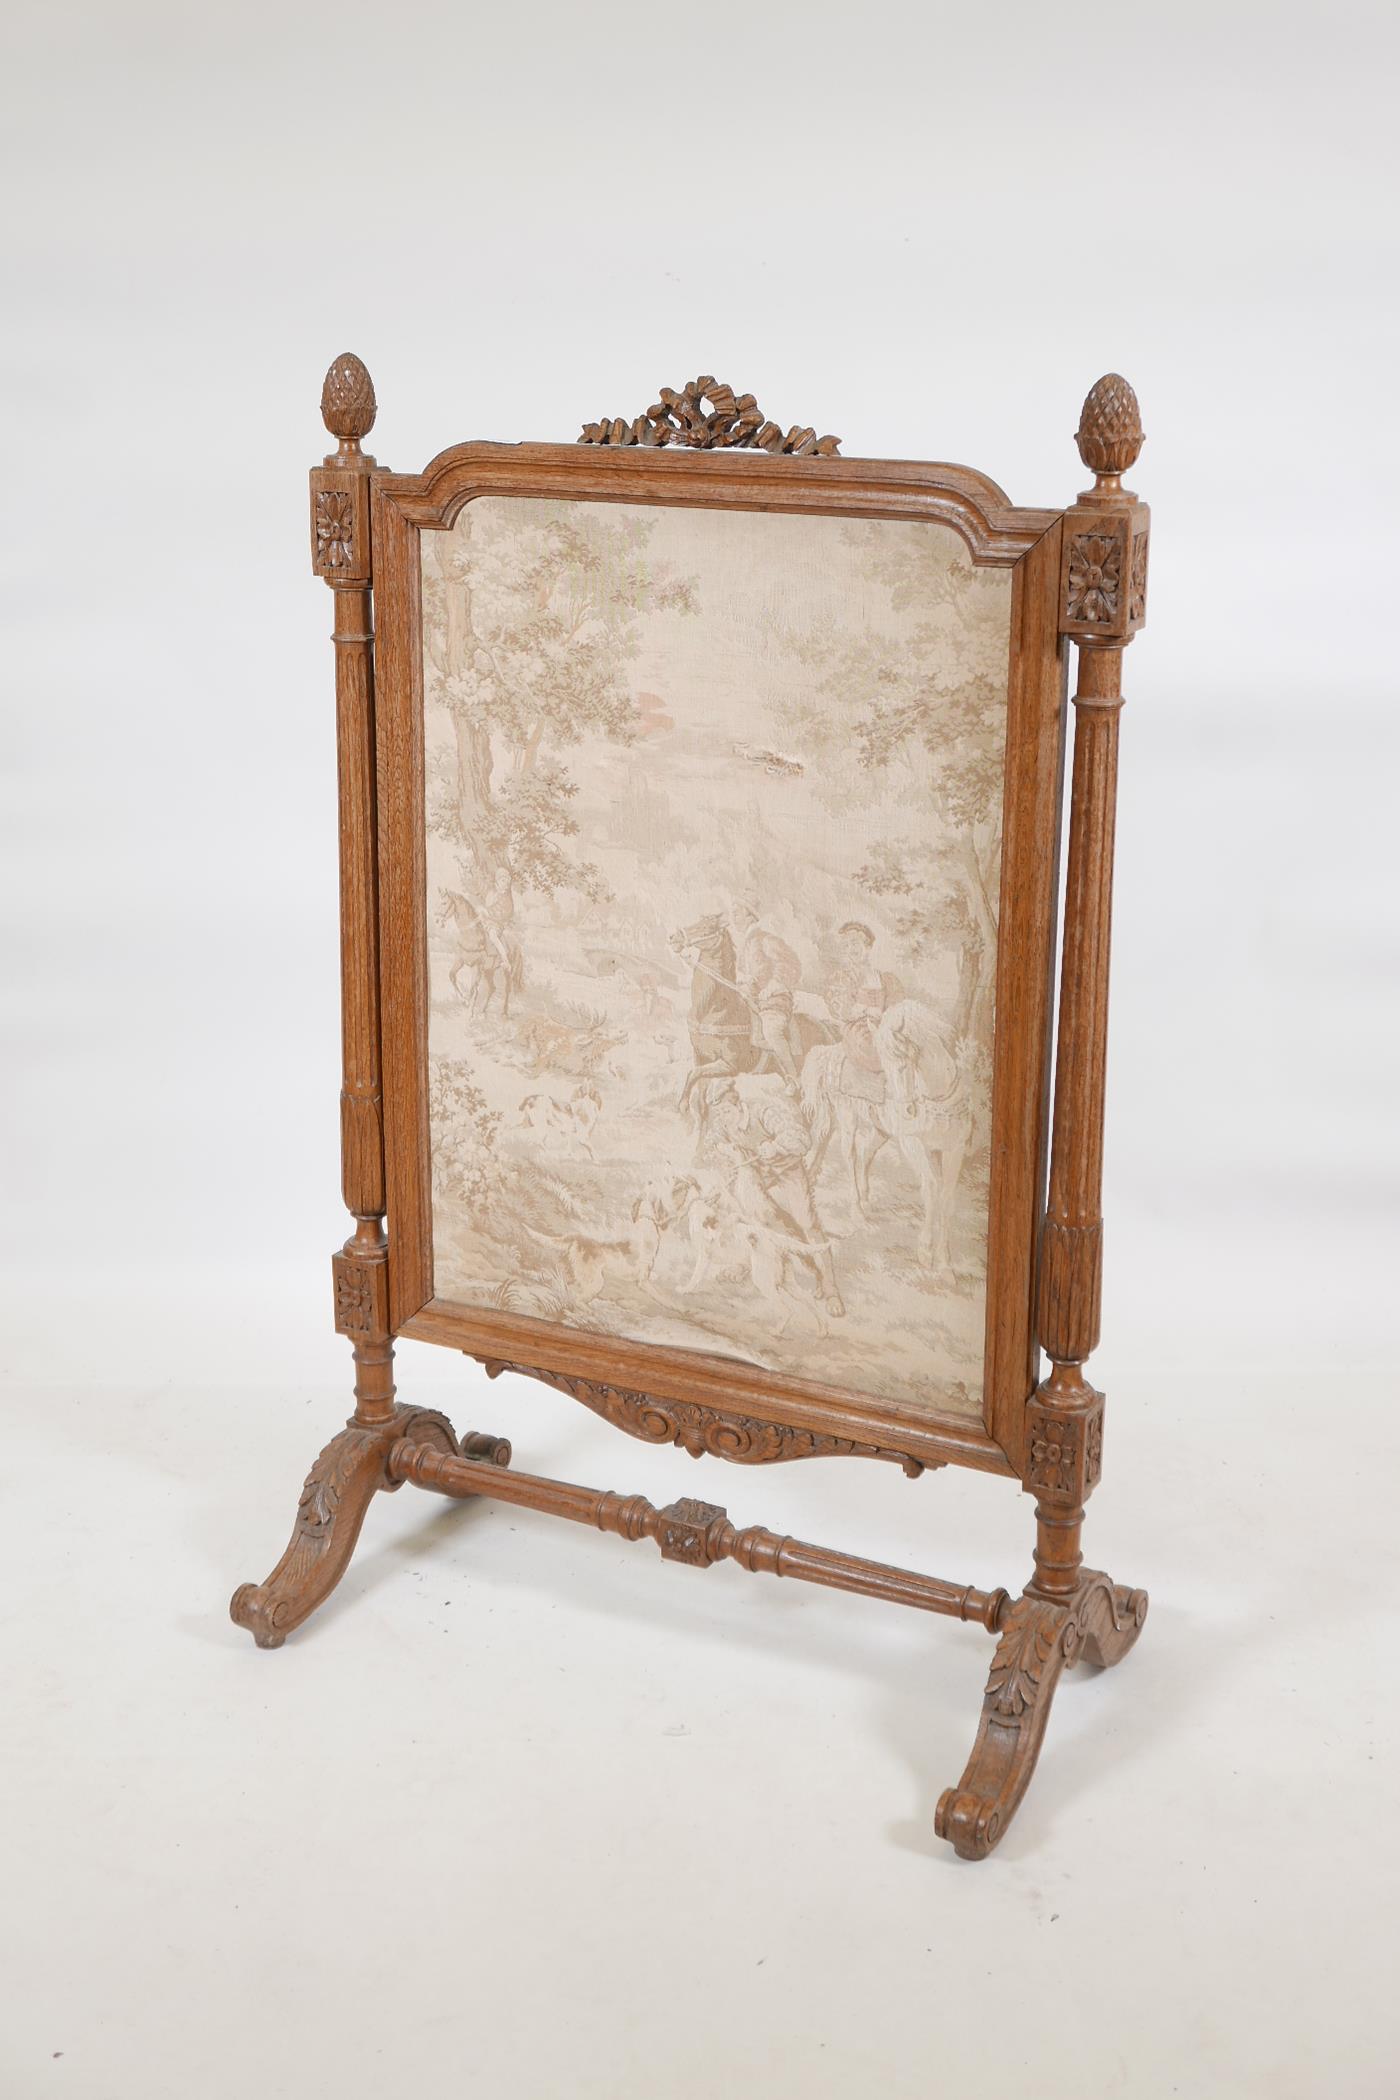 A C19th French carved oak fire screen, with pineapple and patarae decoration and fluted columns